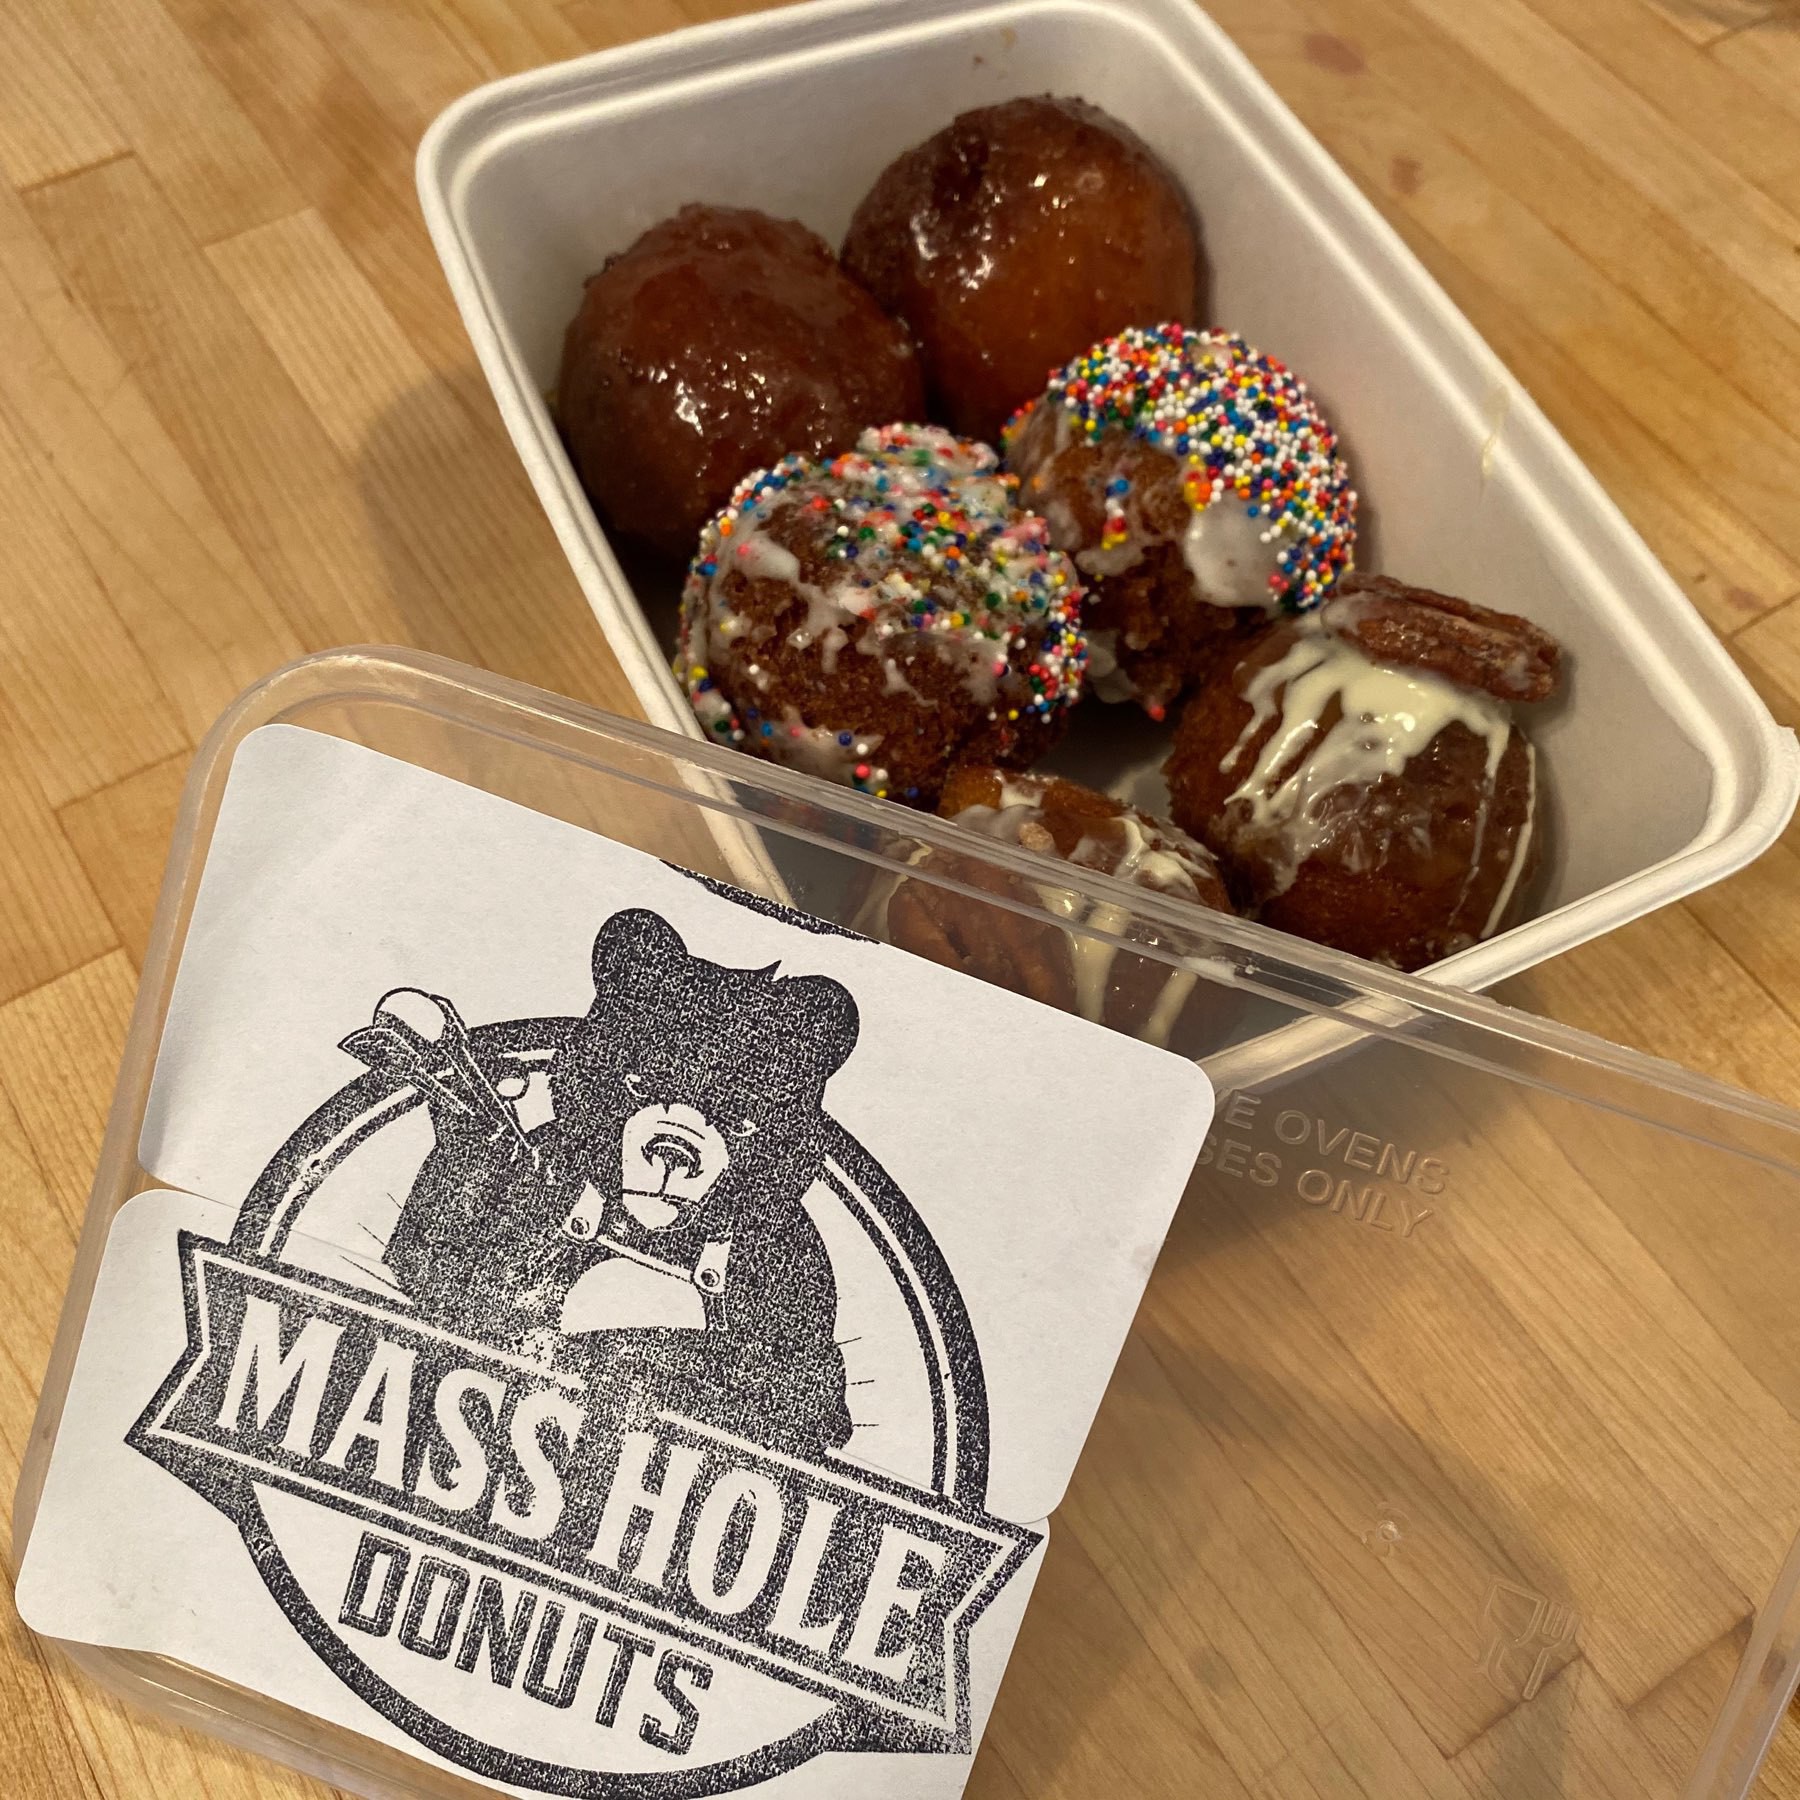 Six decorative donut holes in a box labeled "Mass Hole Donuts."